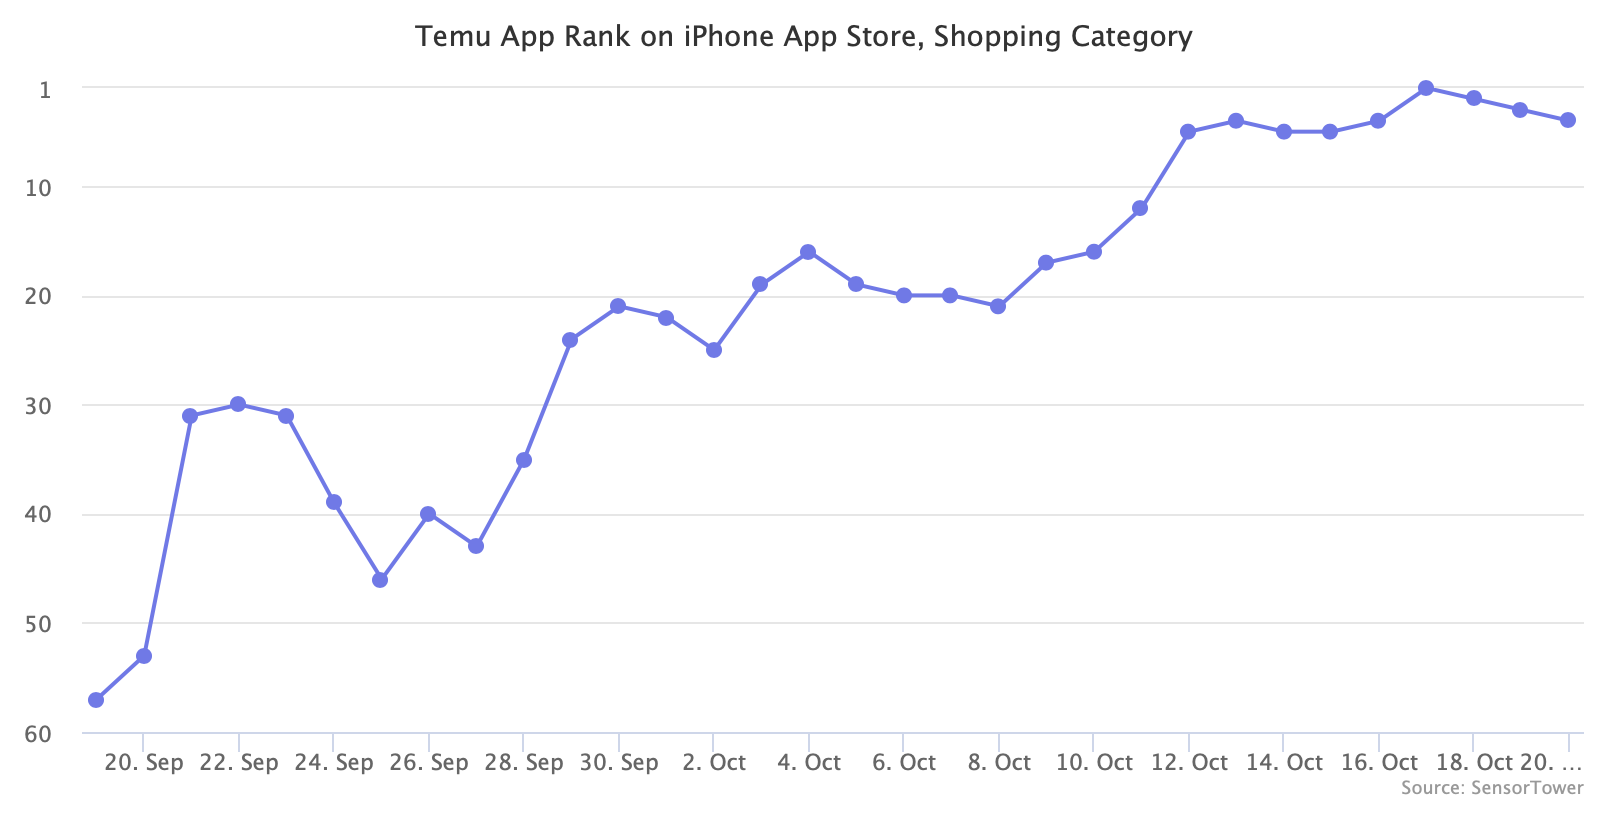 Temu App Rank on iPhone App Store, Shopping Category